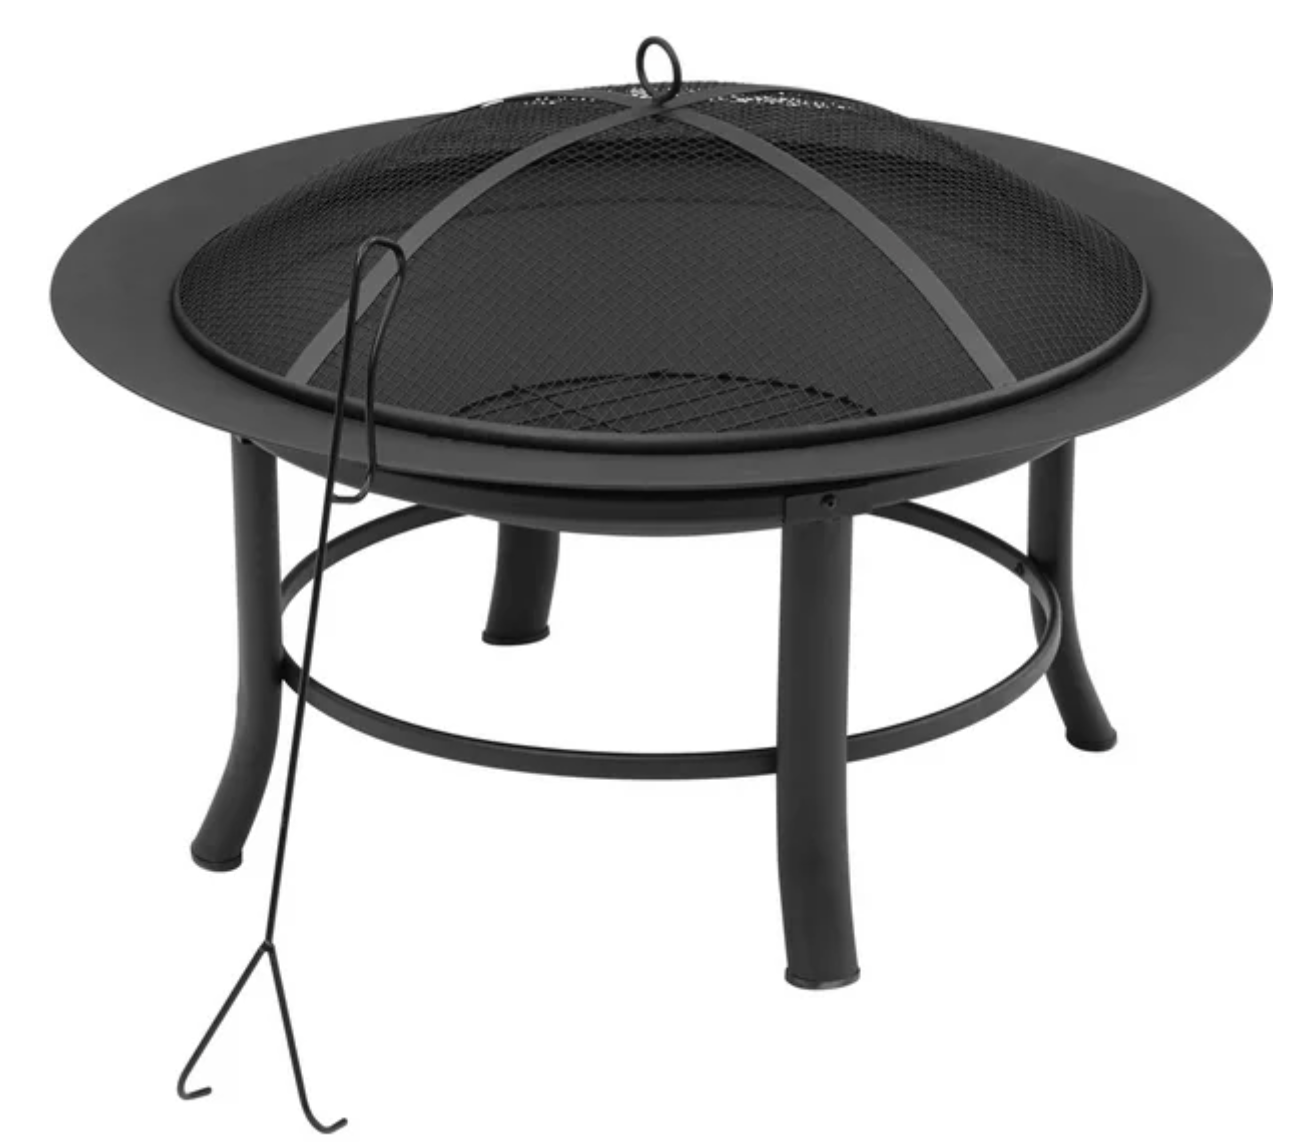 Mainstays Fire Pit At Walmart! HOT!!